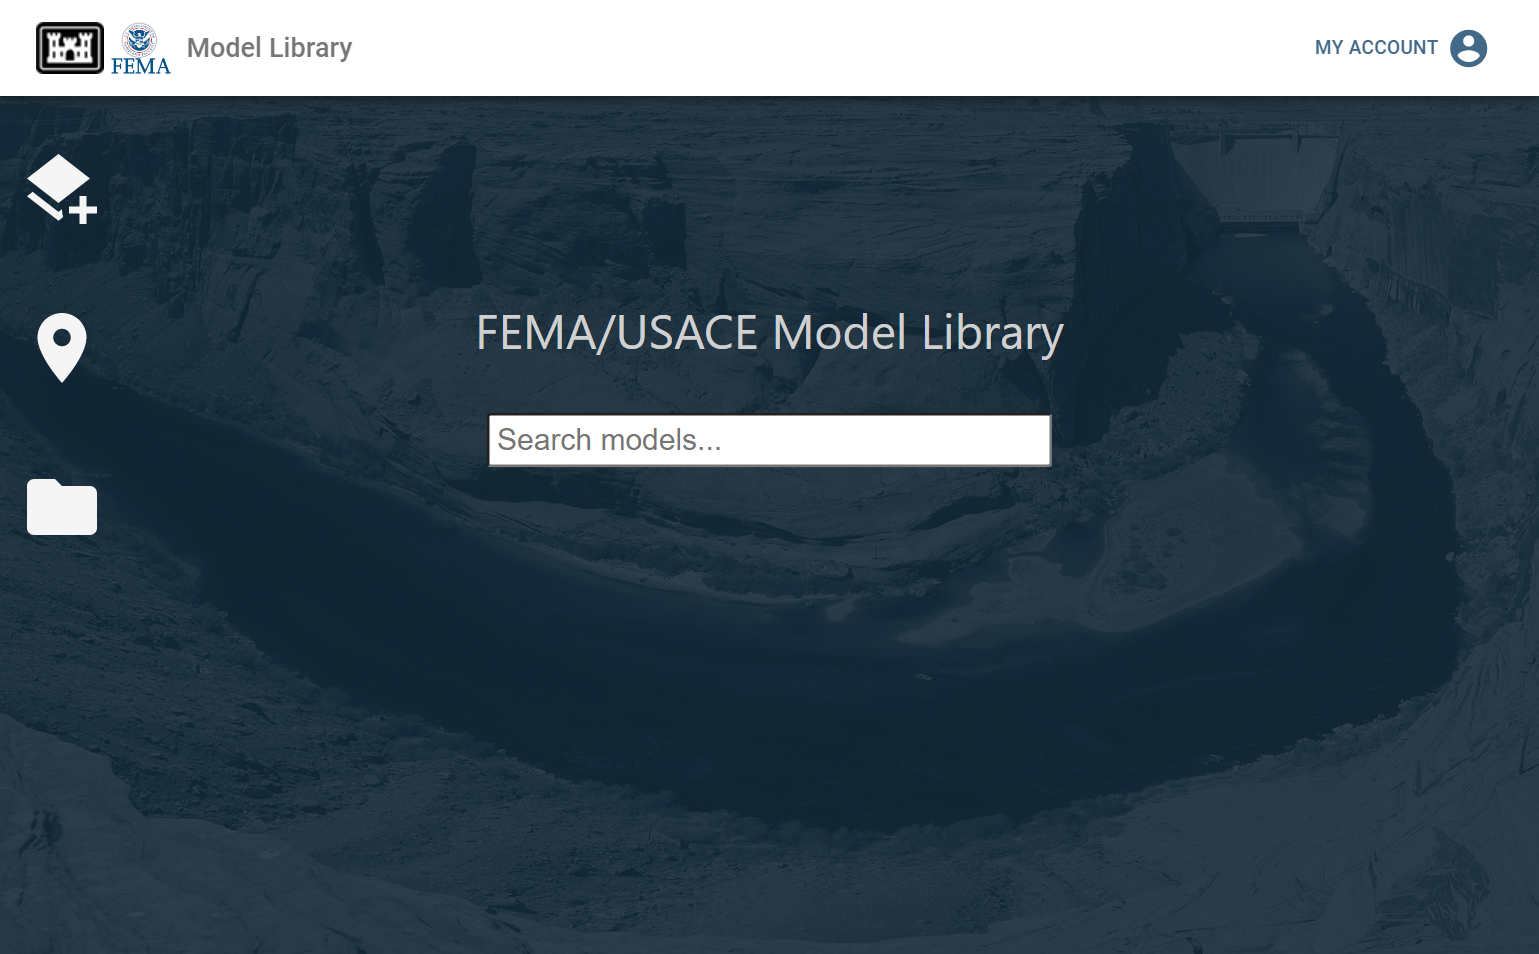 Screen capture of the USACE, FEMA, Model Library online search tool (provided for demonstration purposes).